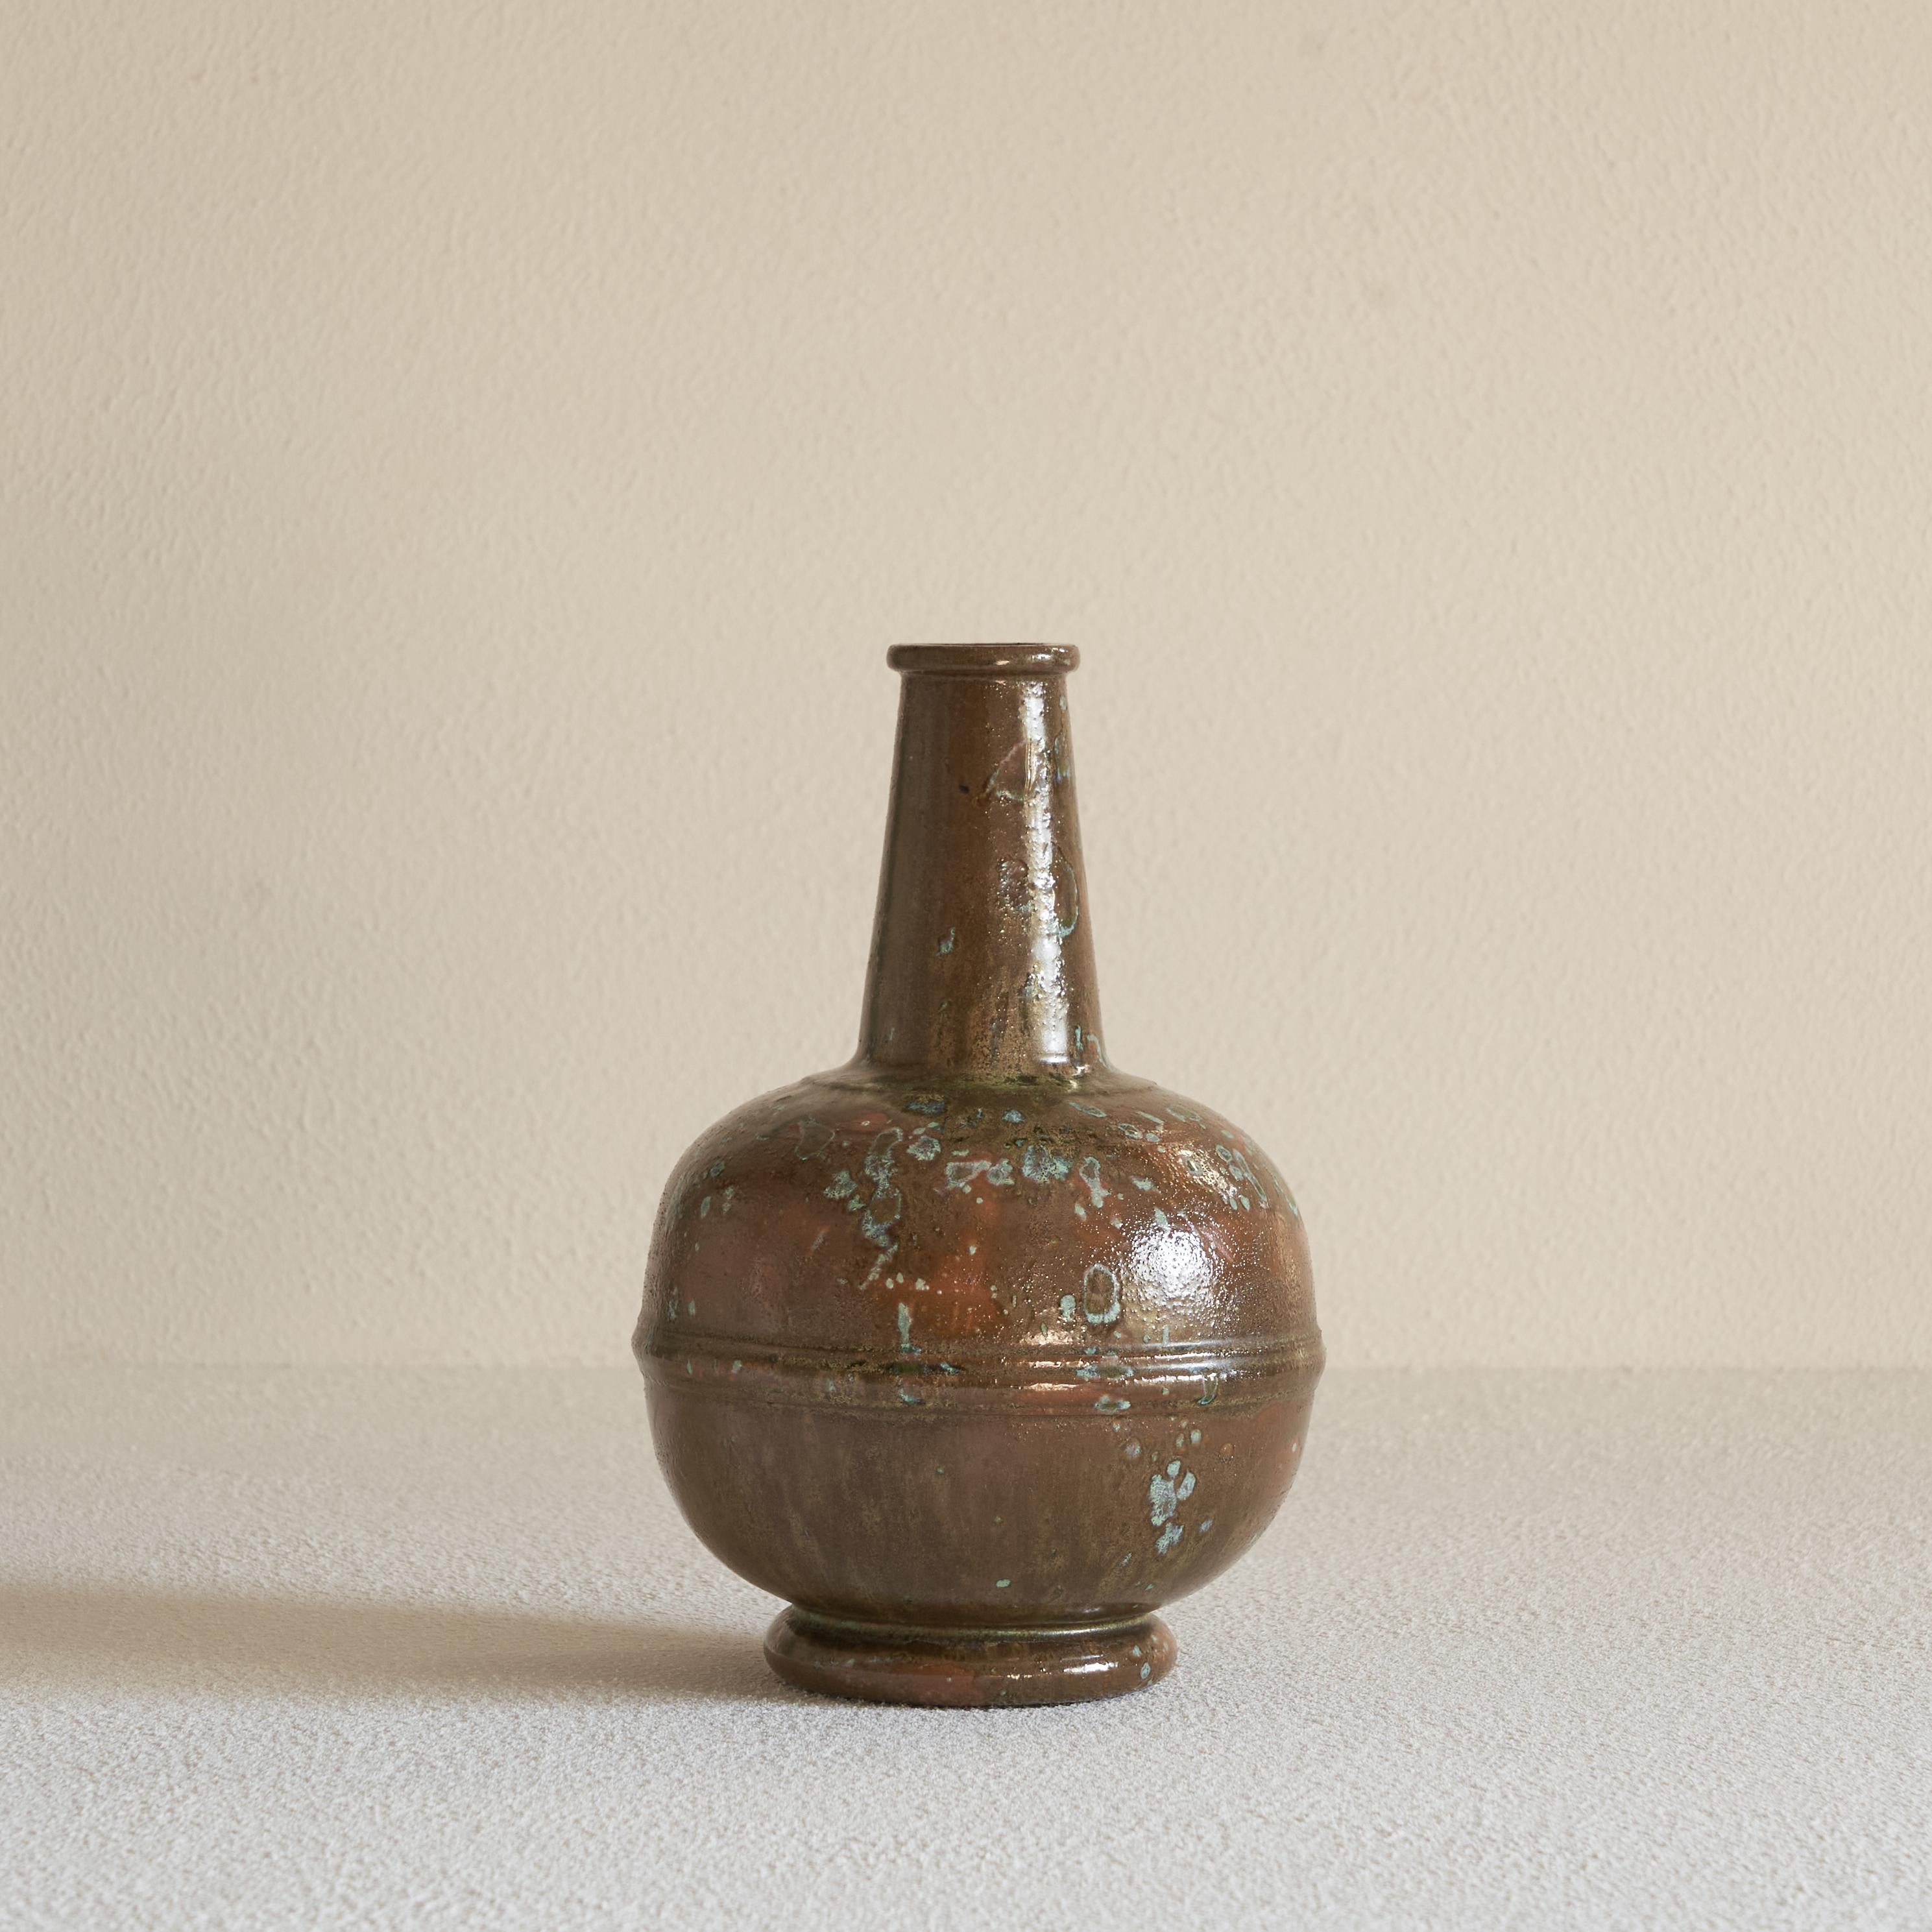 Glazed ceramic vase, early 20th century.

This is a beautifully glazed Studio Pottery vase made in the early 20th century. It has a very distinct shape with a spherical base and a slender spout and interesting details like the raised edge on the